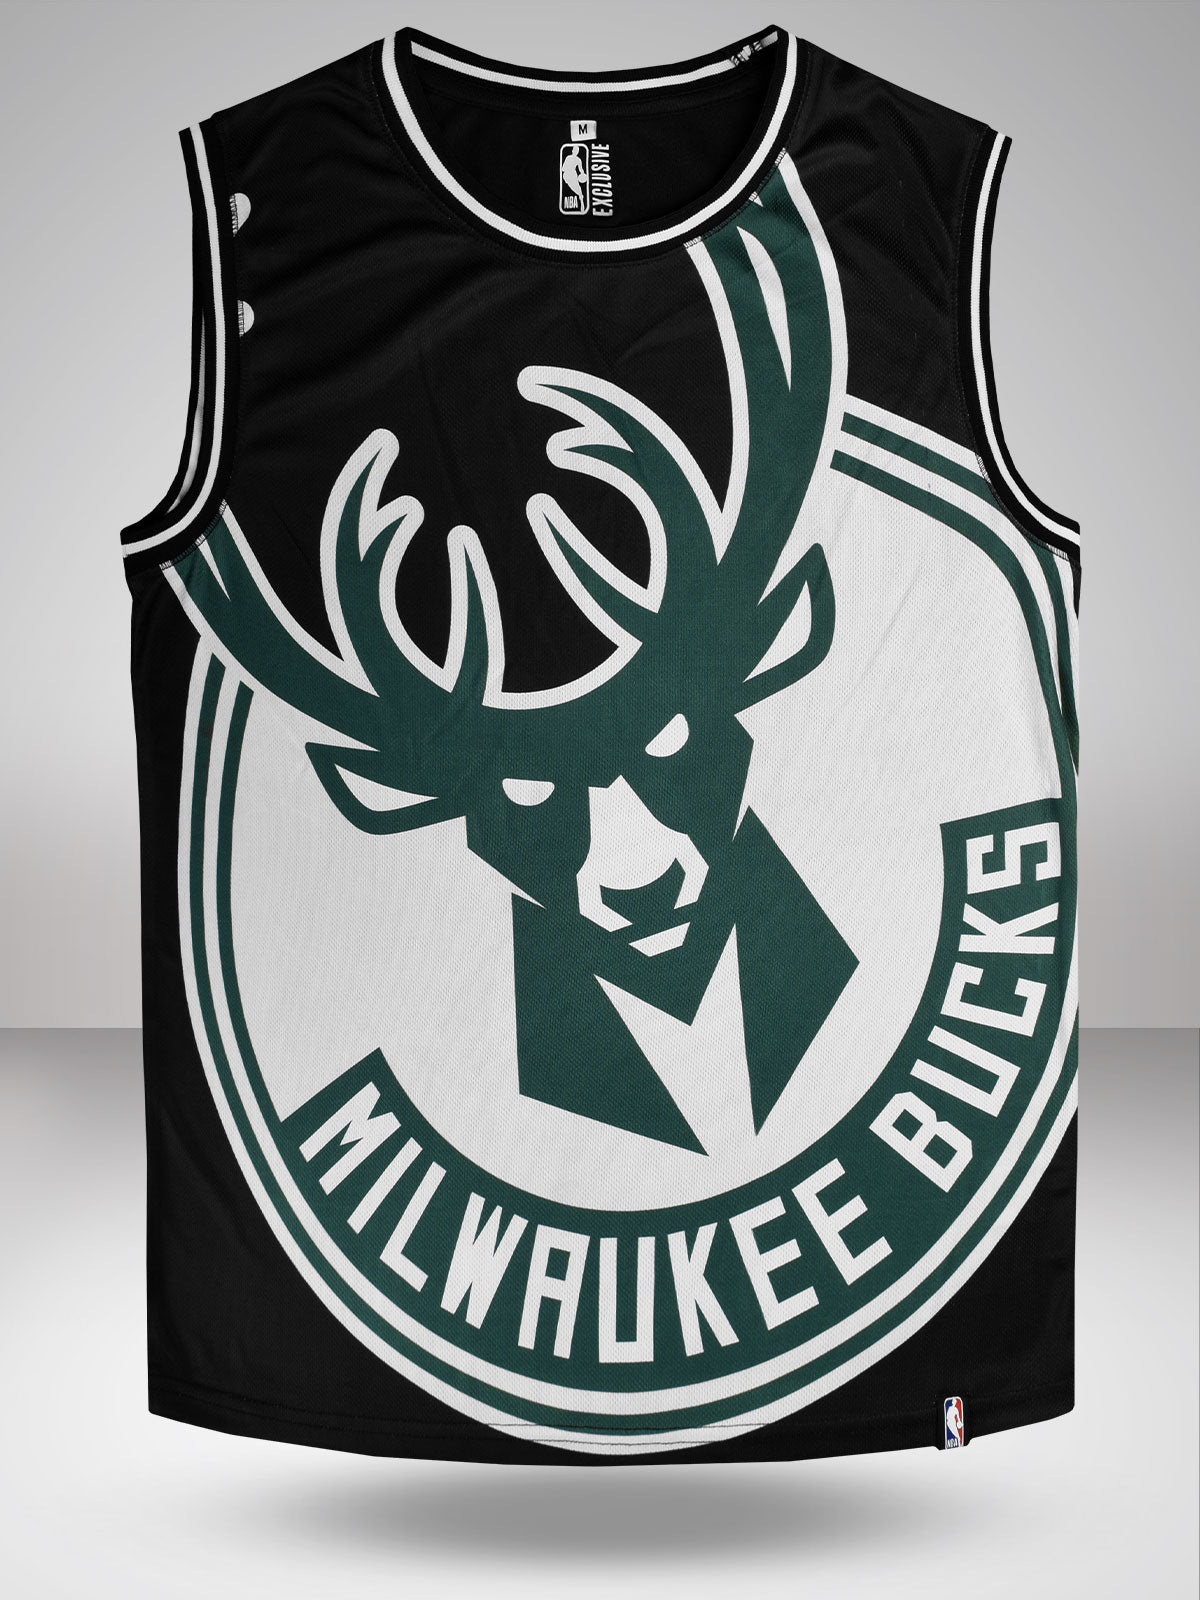 Buy Official NBA Basketball Merchandise Online – Tagged team_Milwaukee  Bucks – Shop The Arena